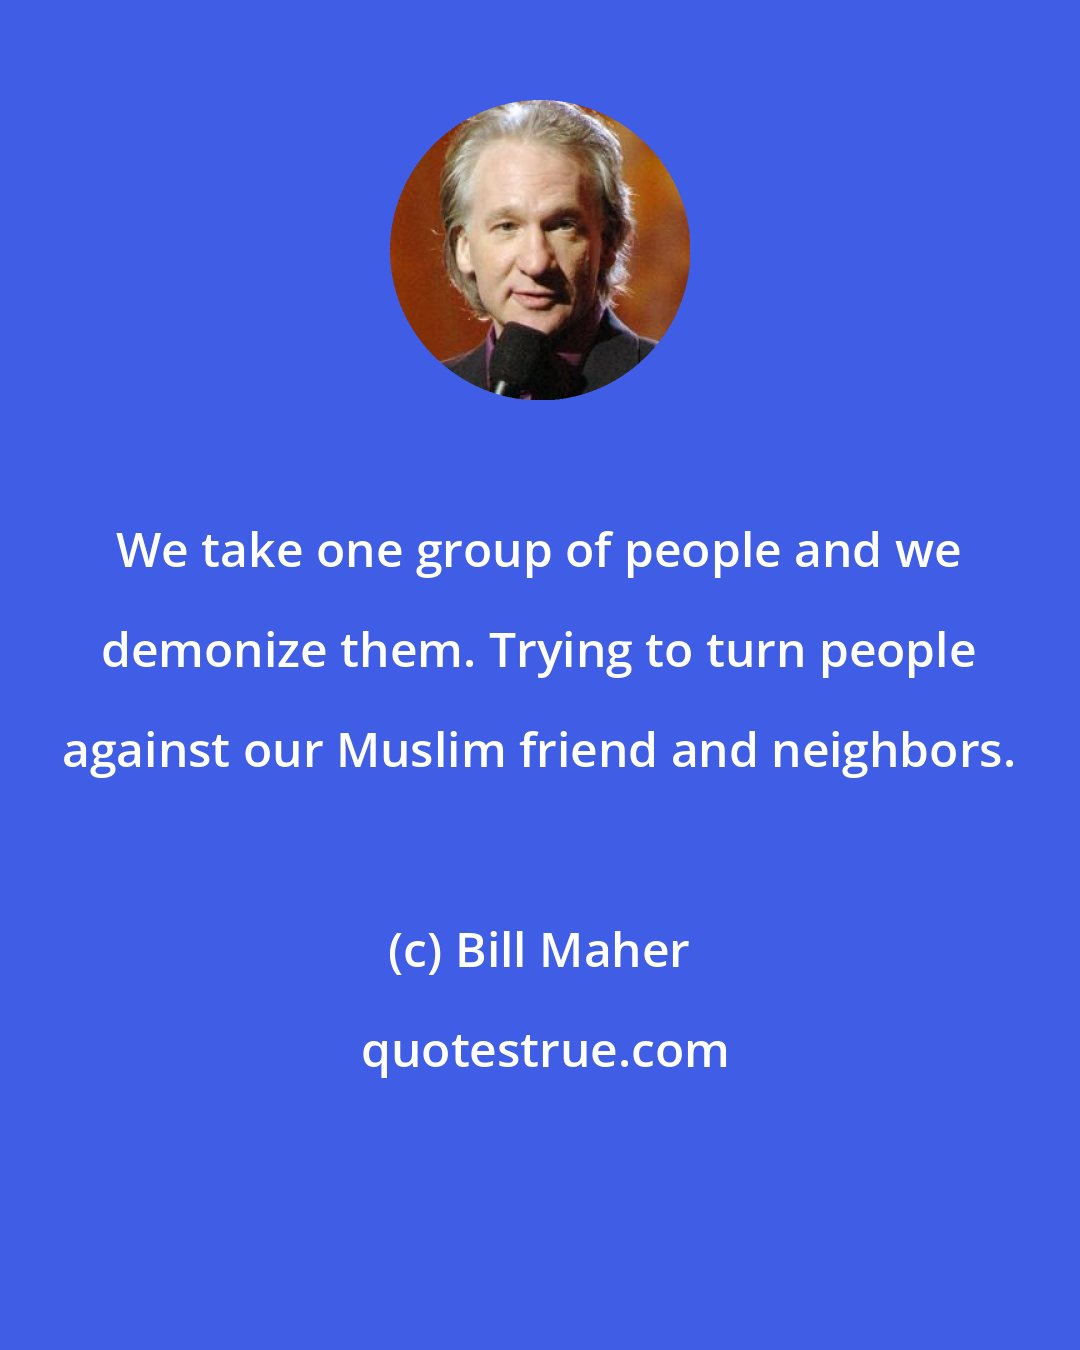 Bill Maher: We take one group of people and we demonize them. Trying to turn people against our Muslim friend and neighbors.